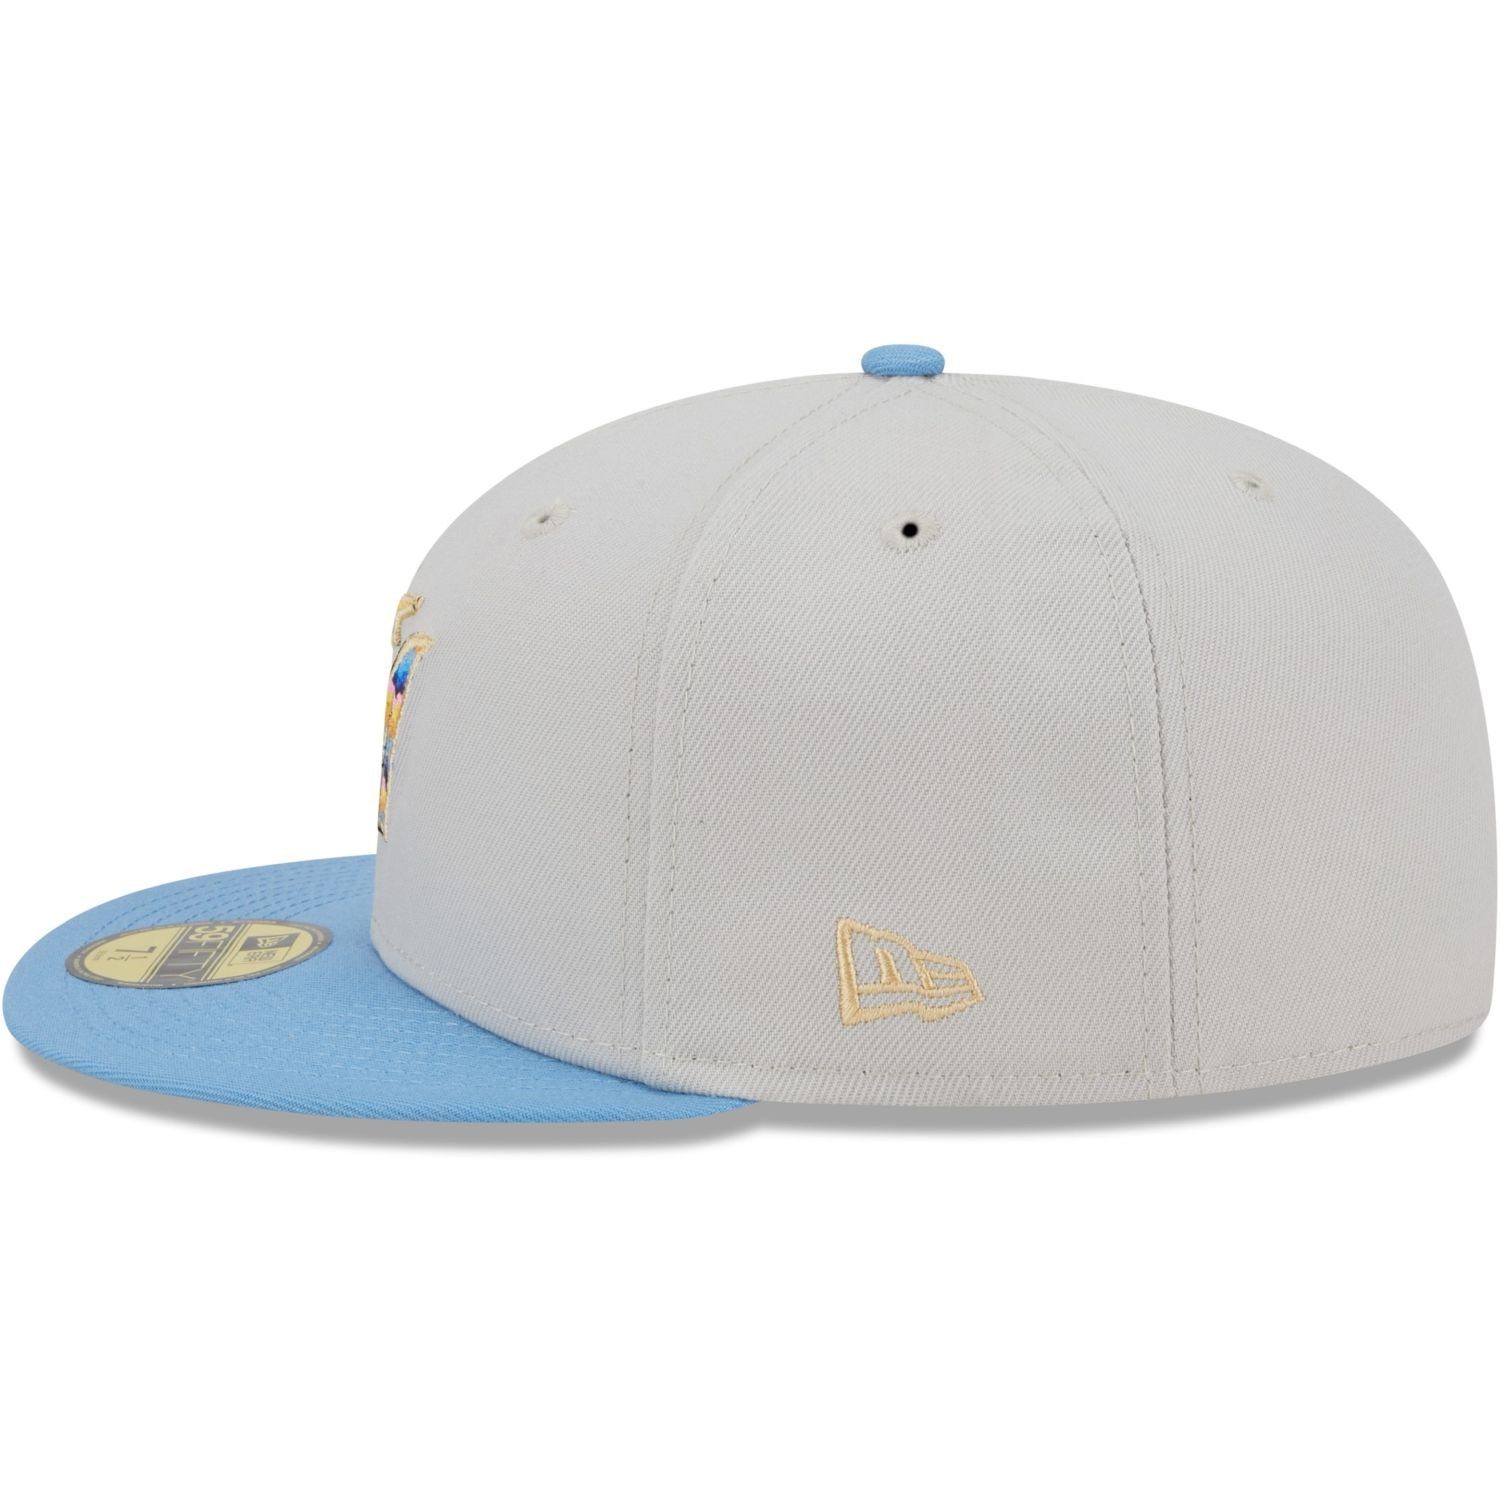 New Fitted Marlins Miami Era BEACHFRONT Cap 59Fifty